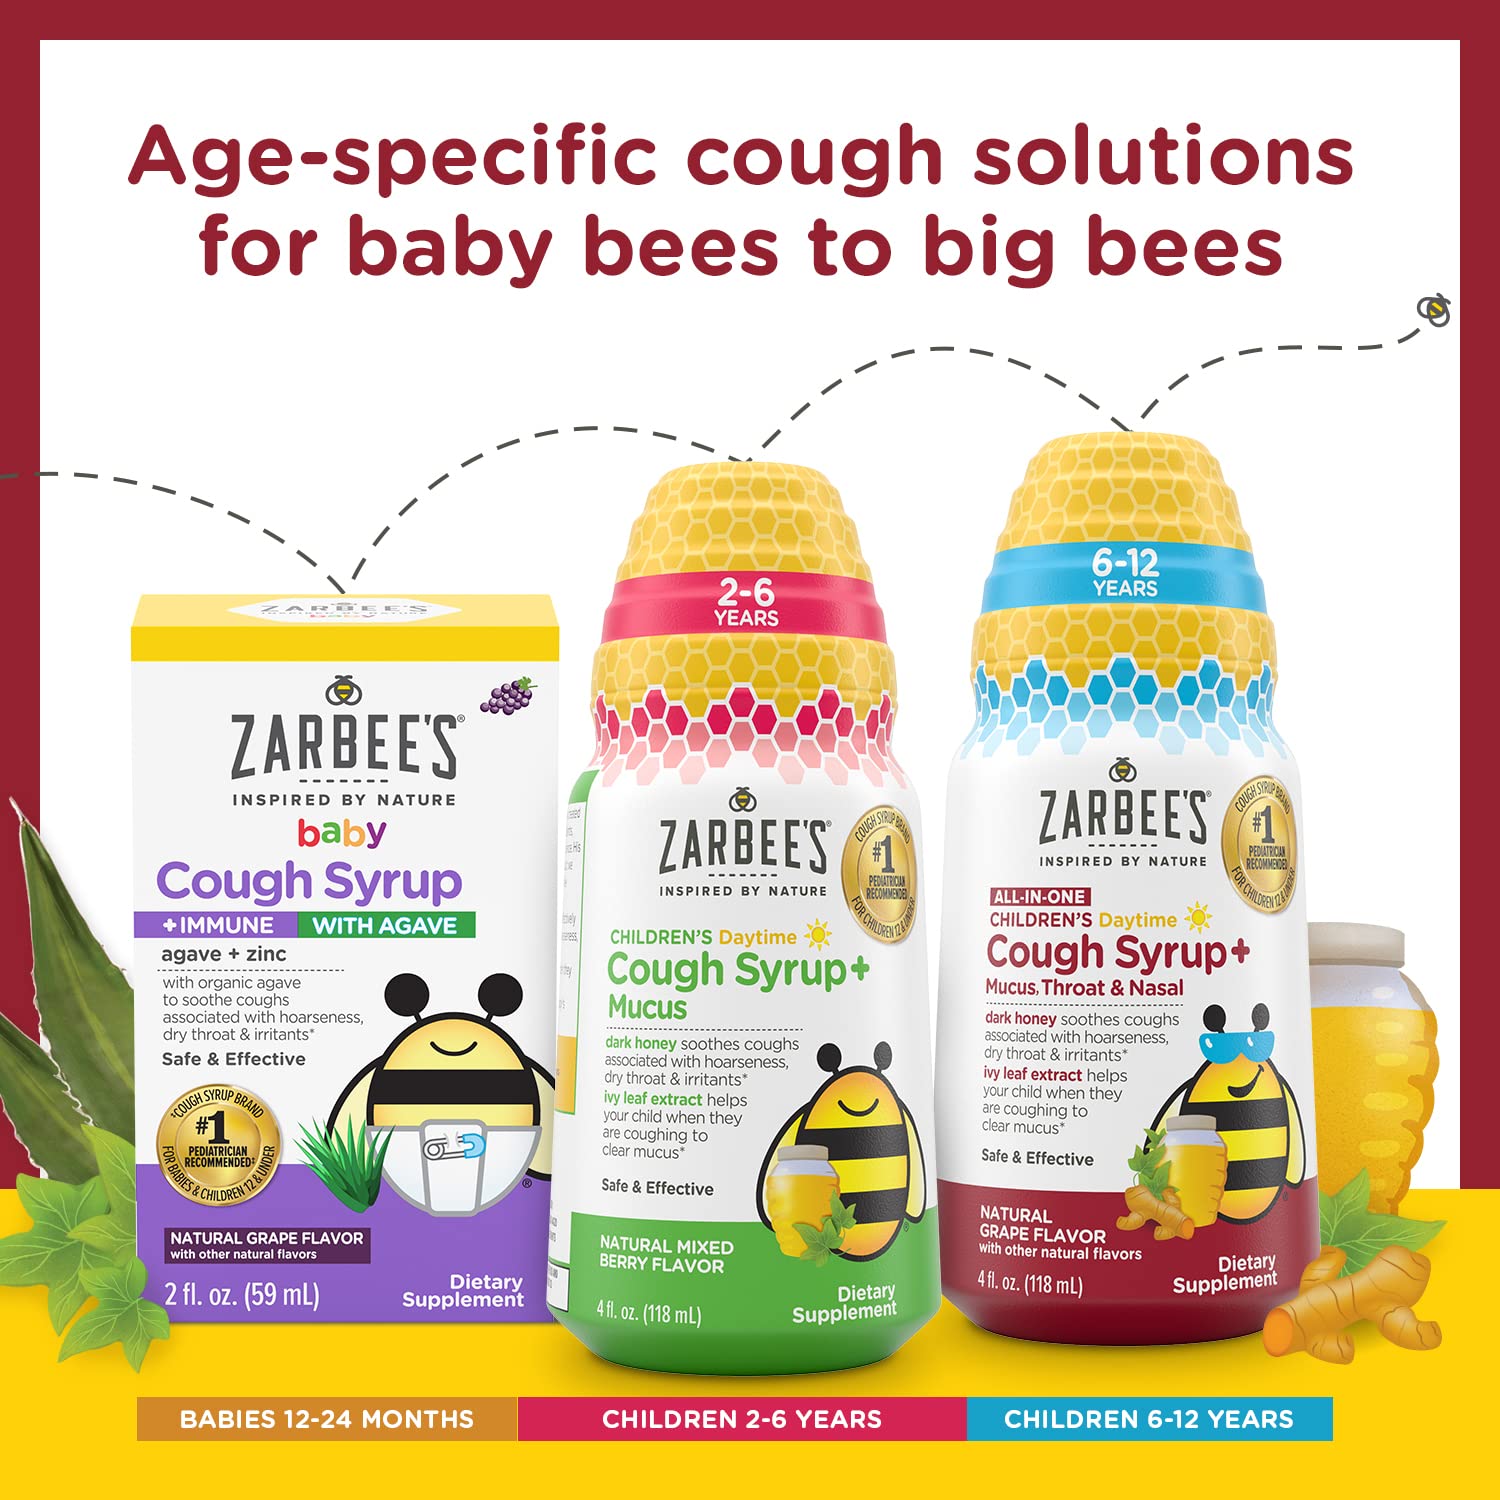 Zarbee's Kids All-in-One Nighttime Cough for Children 6-12 with Dark Honey, Turmeric, B-Vitamins & Zinc, 1 Pediatrician Recommended, Drug & Alcohol-Free, Grape Flavor, 4FL Oz (Pack of 2)